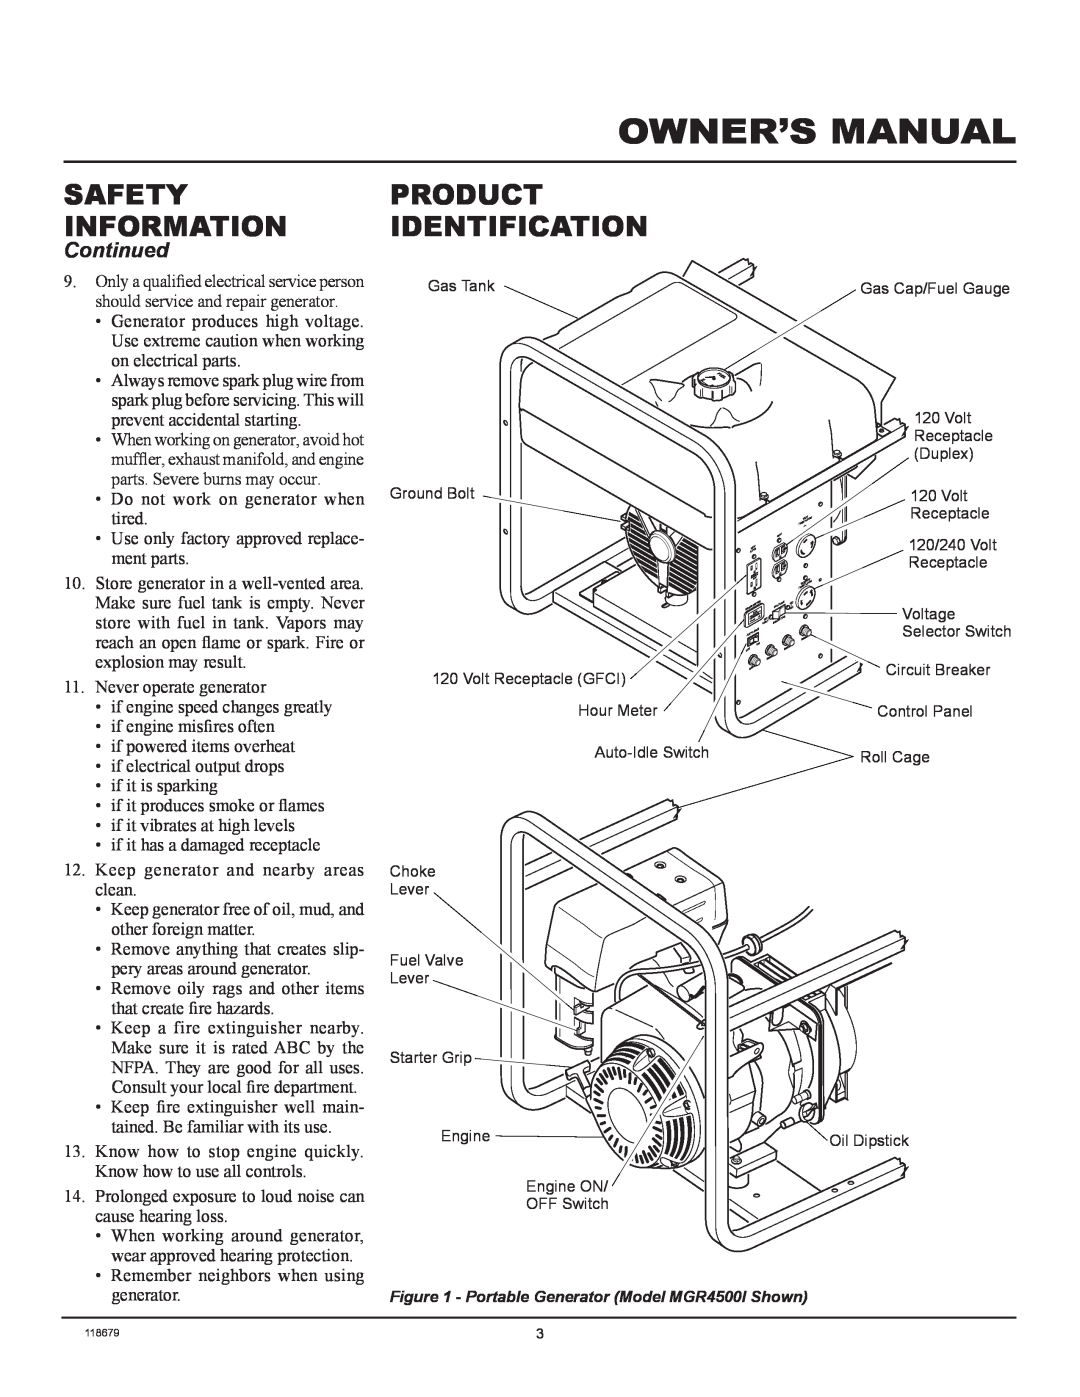 Master Lock MGR2900A, MGR4500I, MGR6000I installation manual Product Identification, Continued, Safety Information 